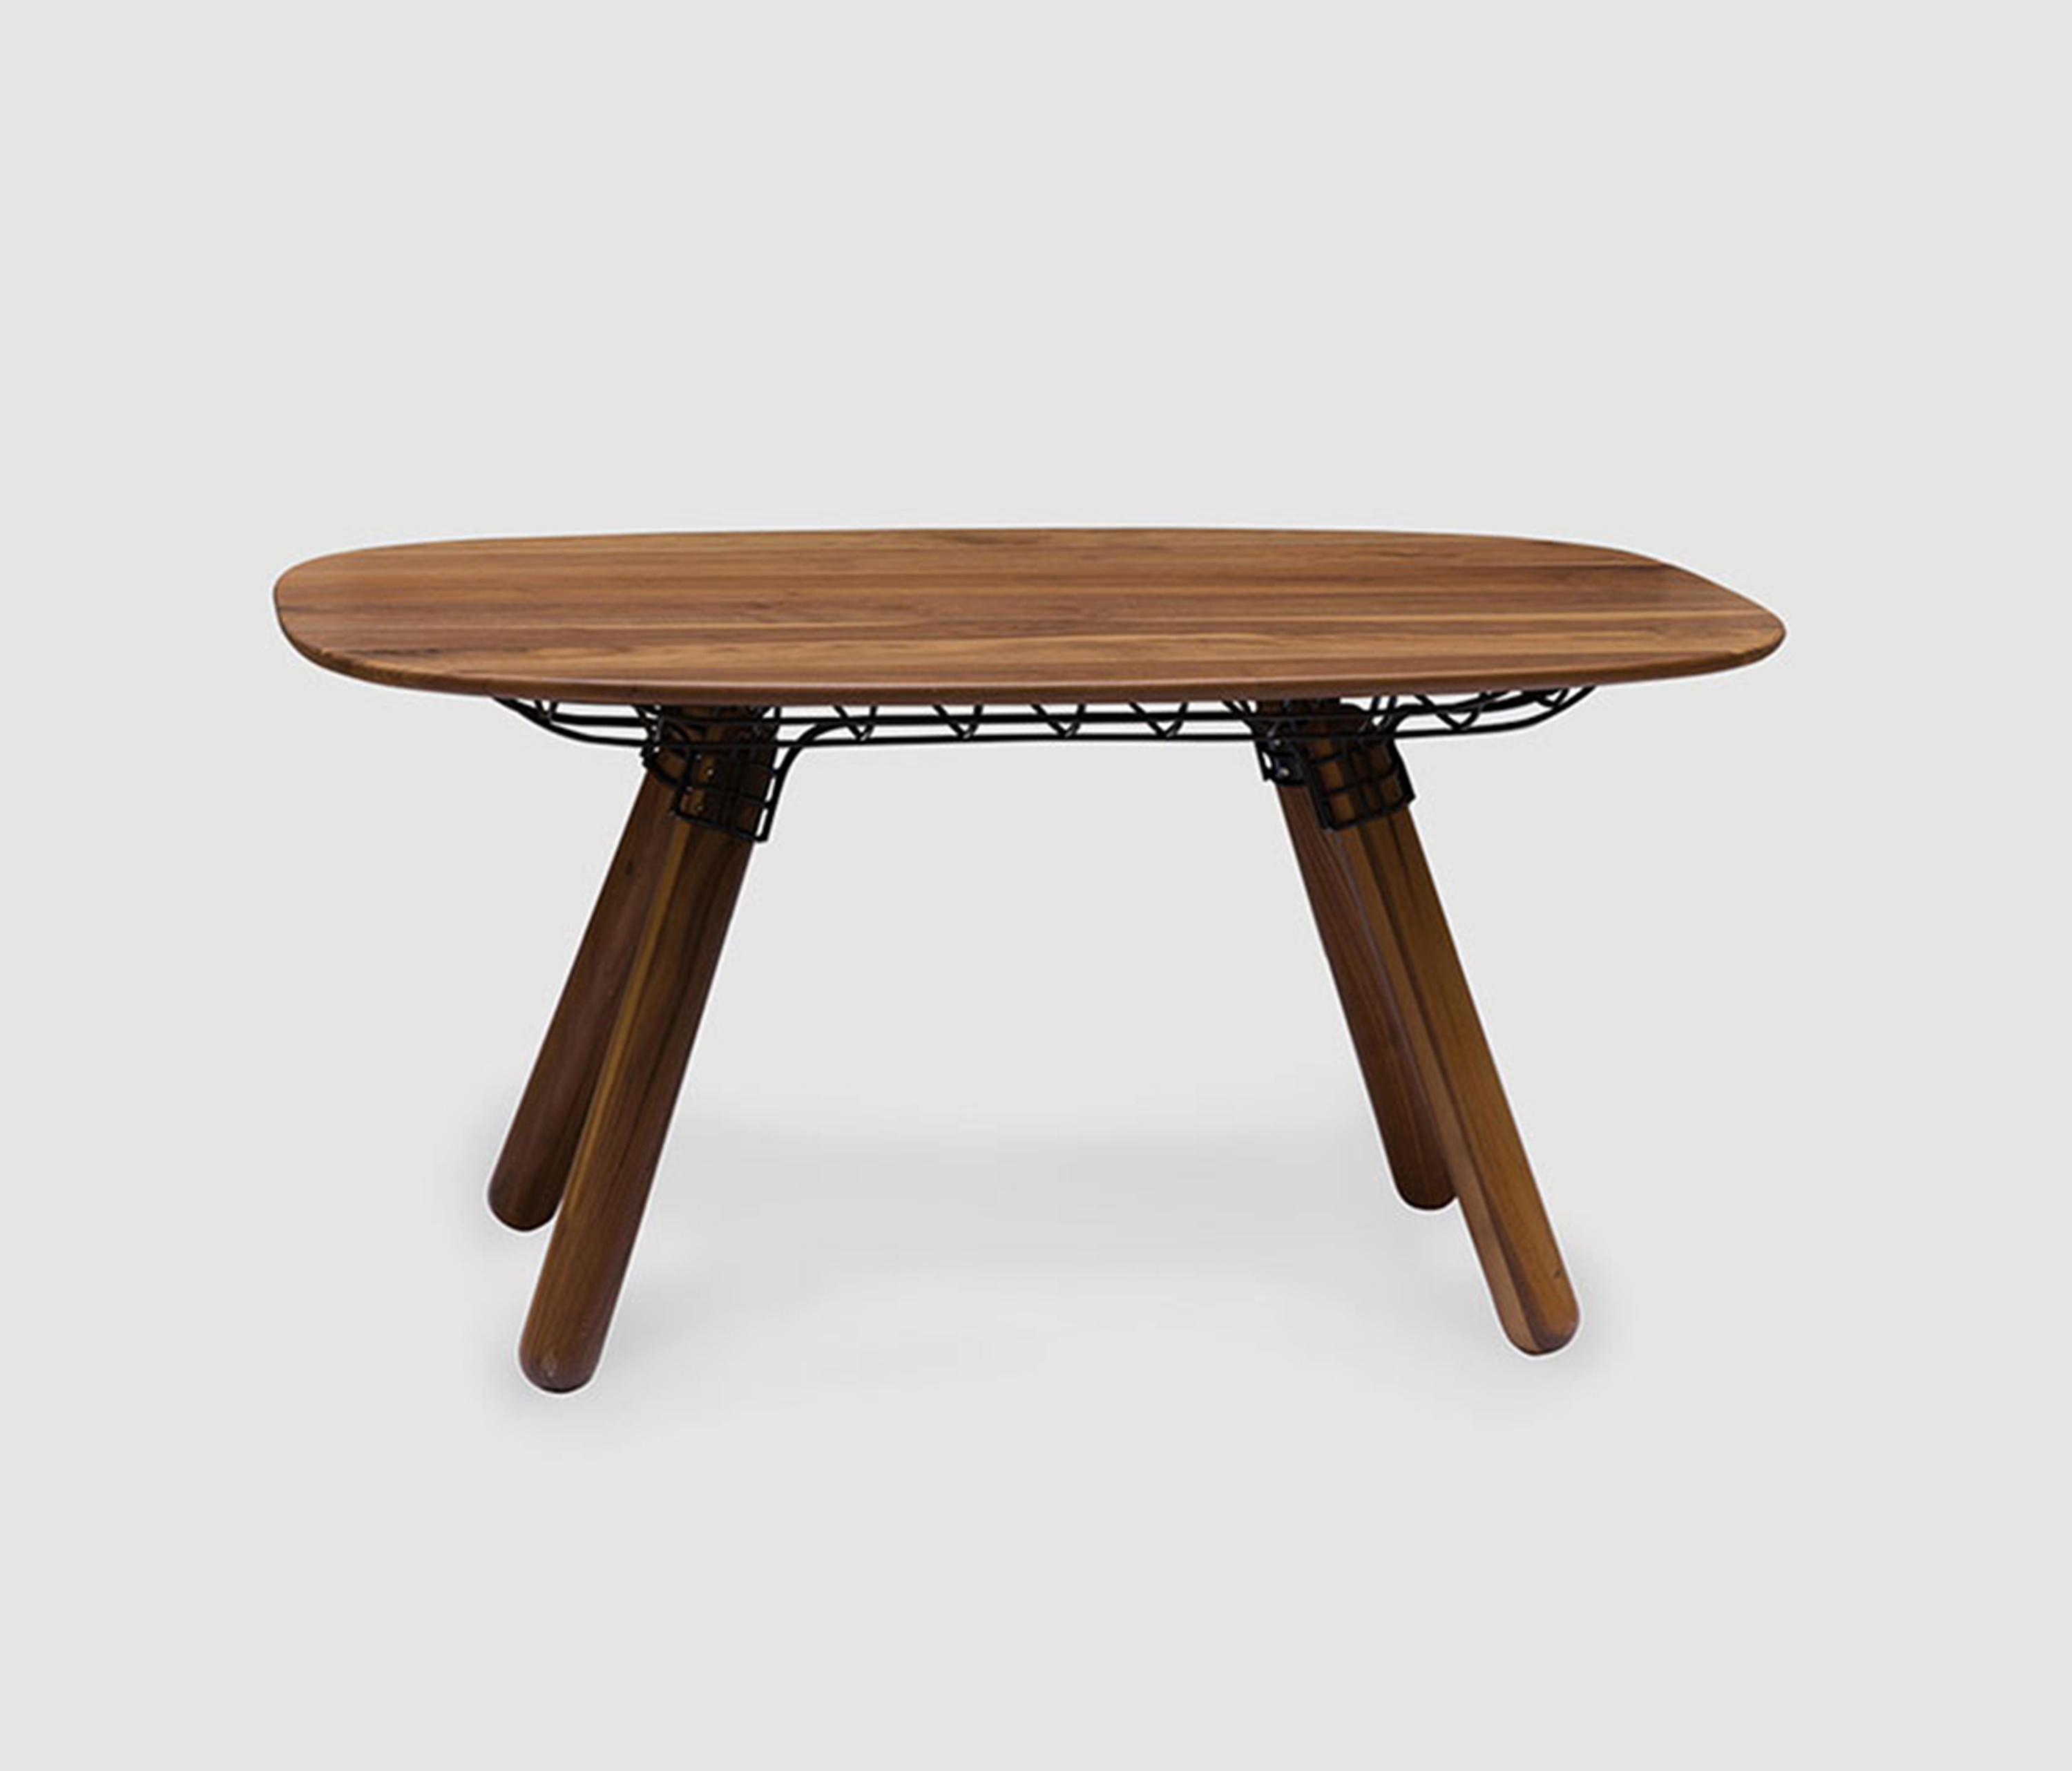 Magnum 150 Dining Tables From La Chance Architonic